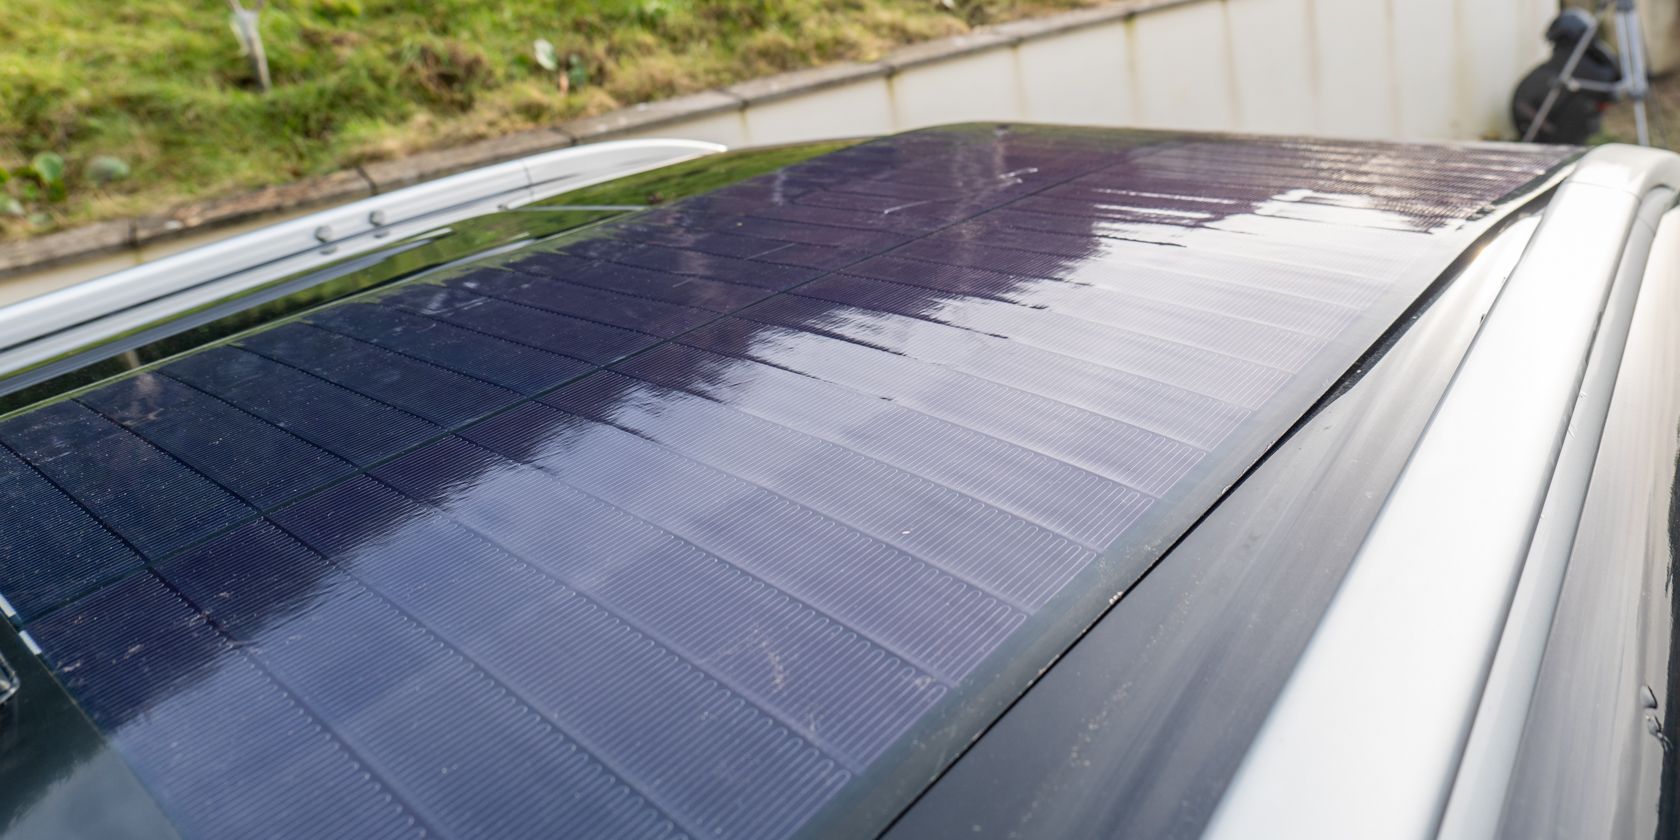 These light, thin, flexible solar panels 'peel and stick' to roofs